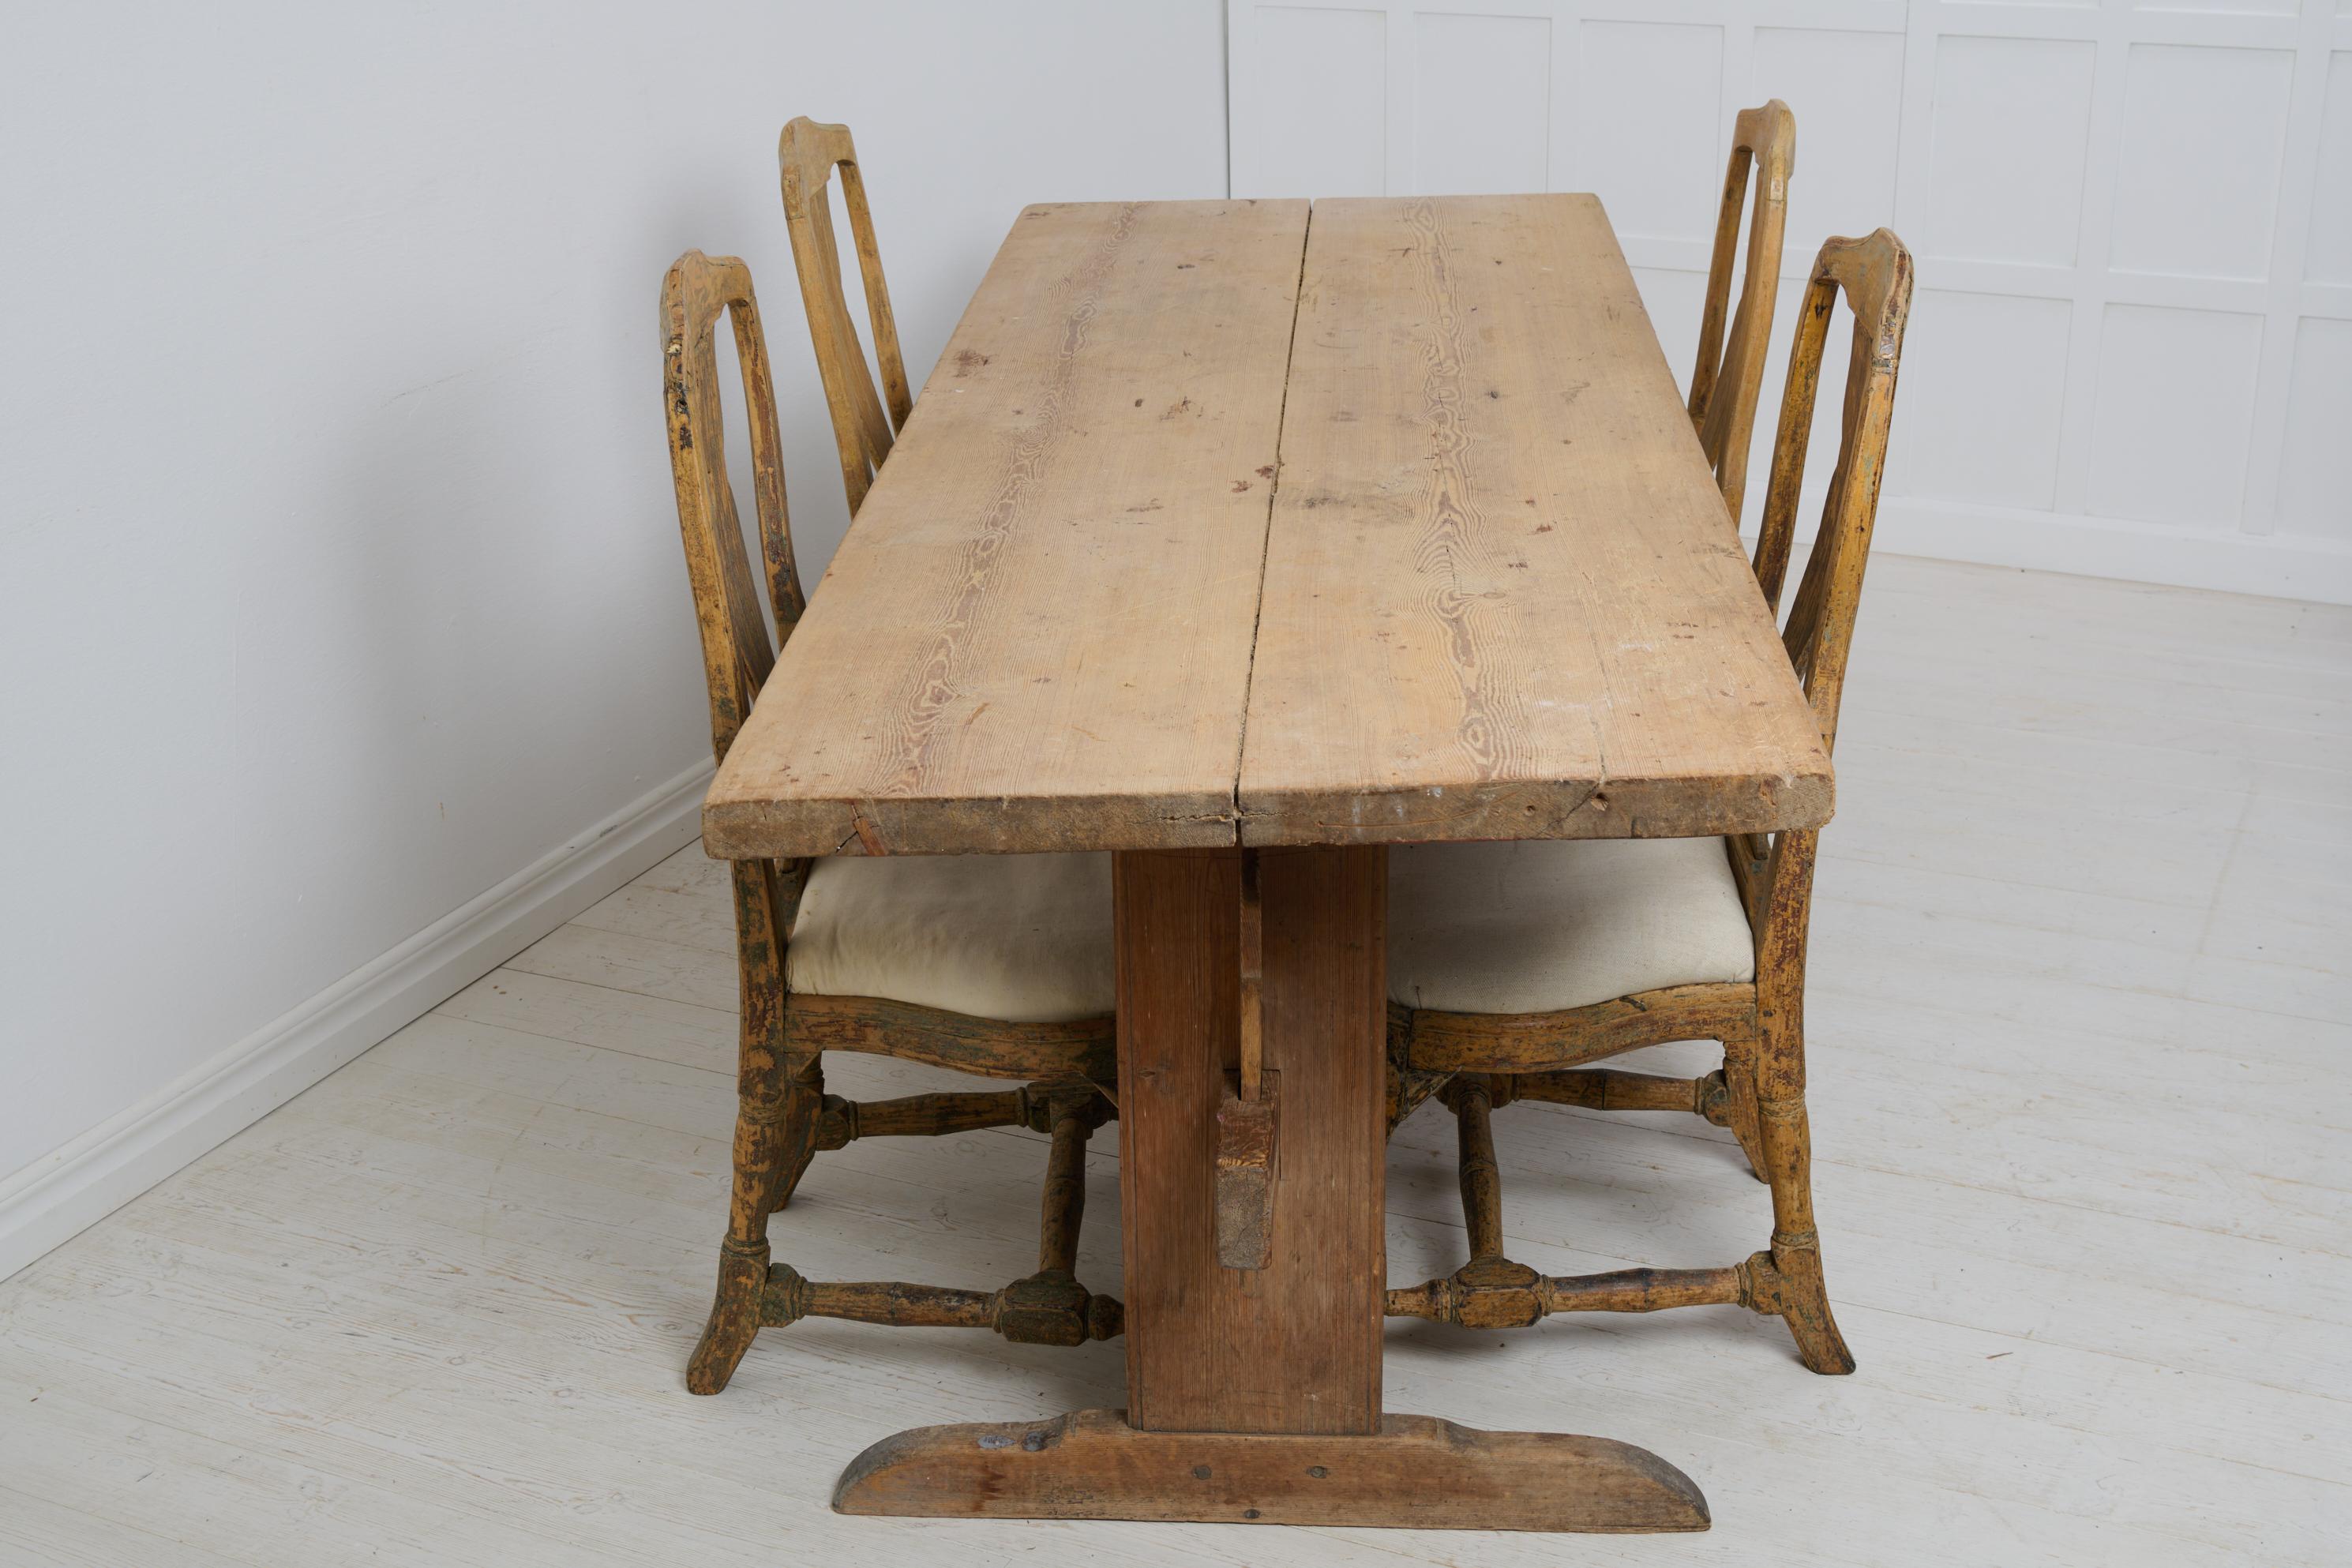 Antique Large Trestle Dining Table, Swedish Solid Pine with Genuine Patina  In Good Condition For Sale In Kramfors, SE